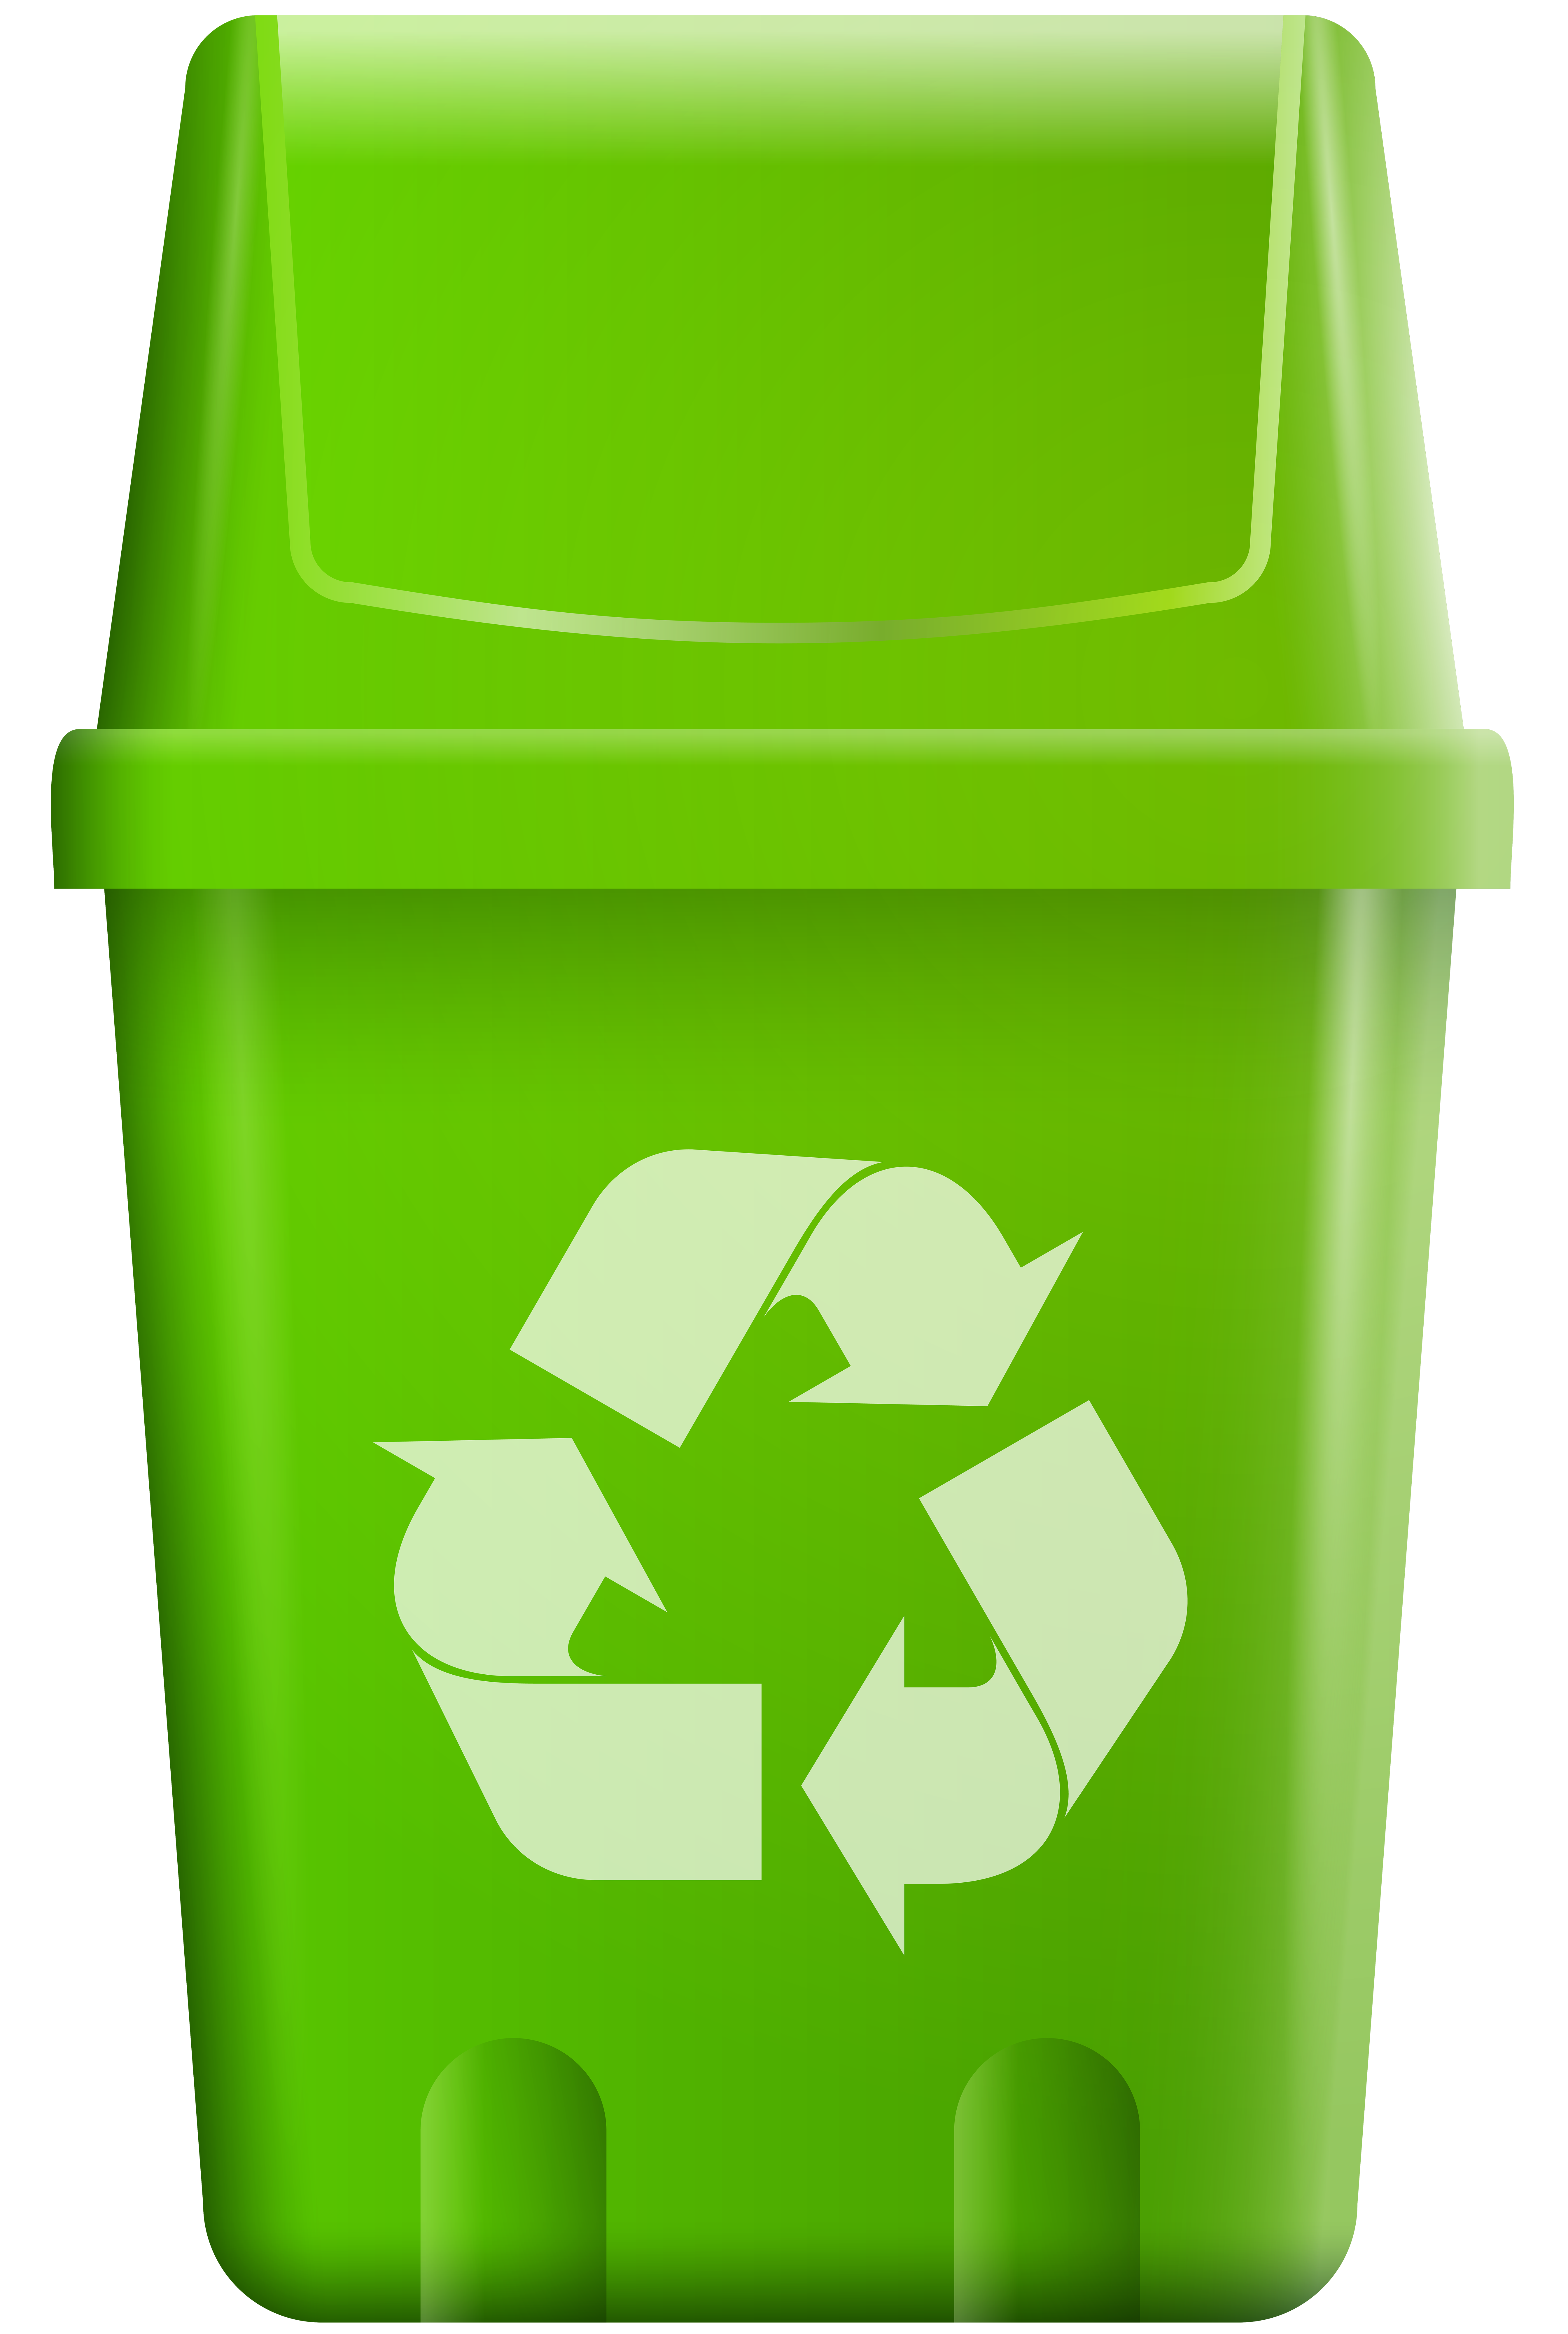 Trash Bin with Recycle Symbol PNG Clip Art.